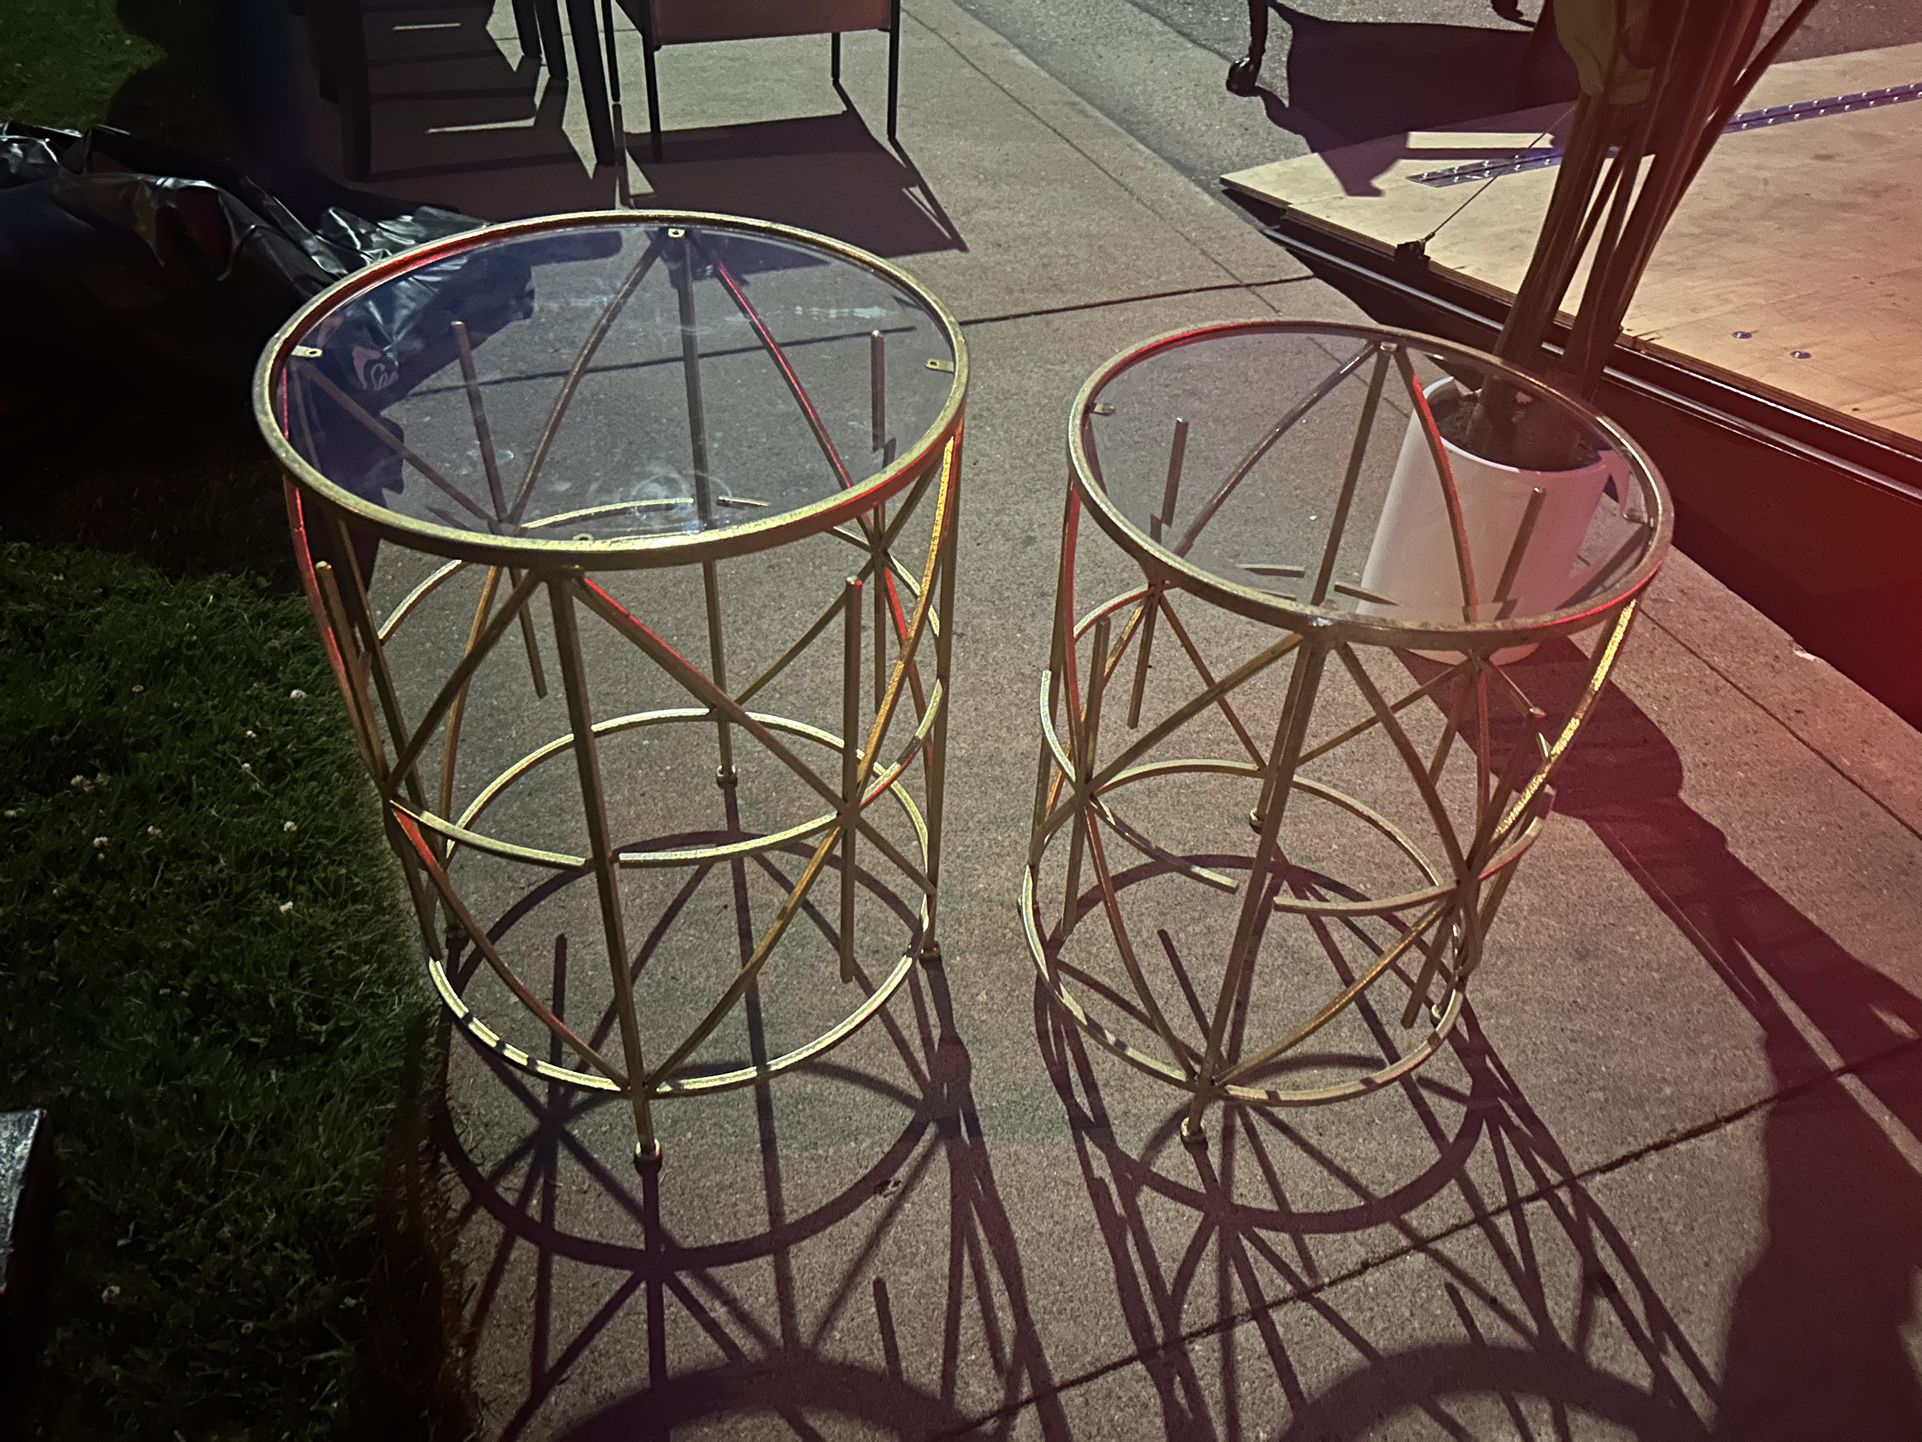 Gold End Tables